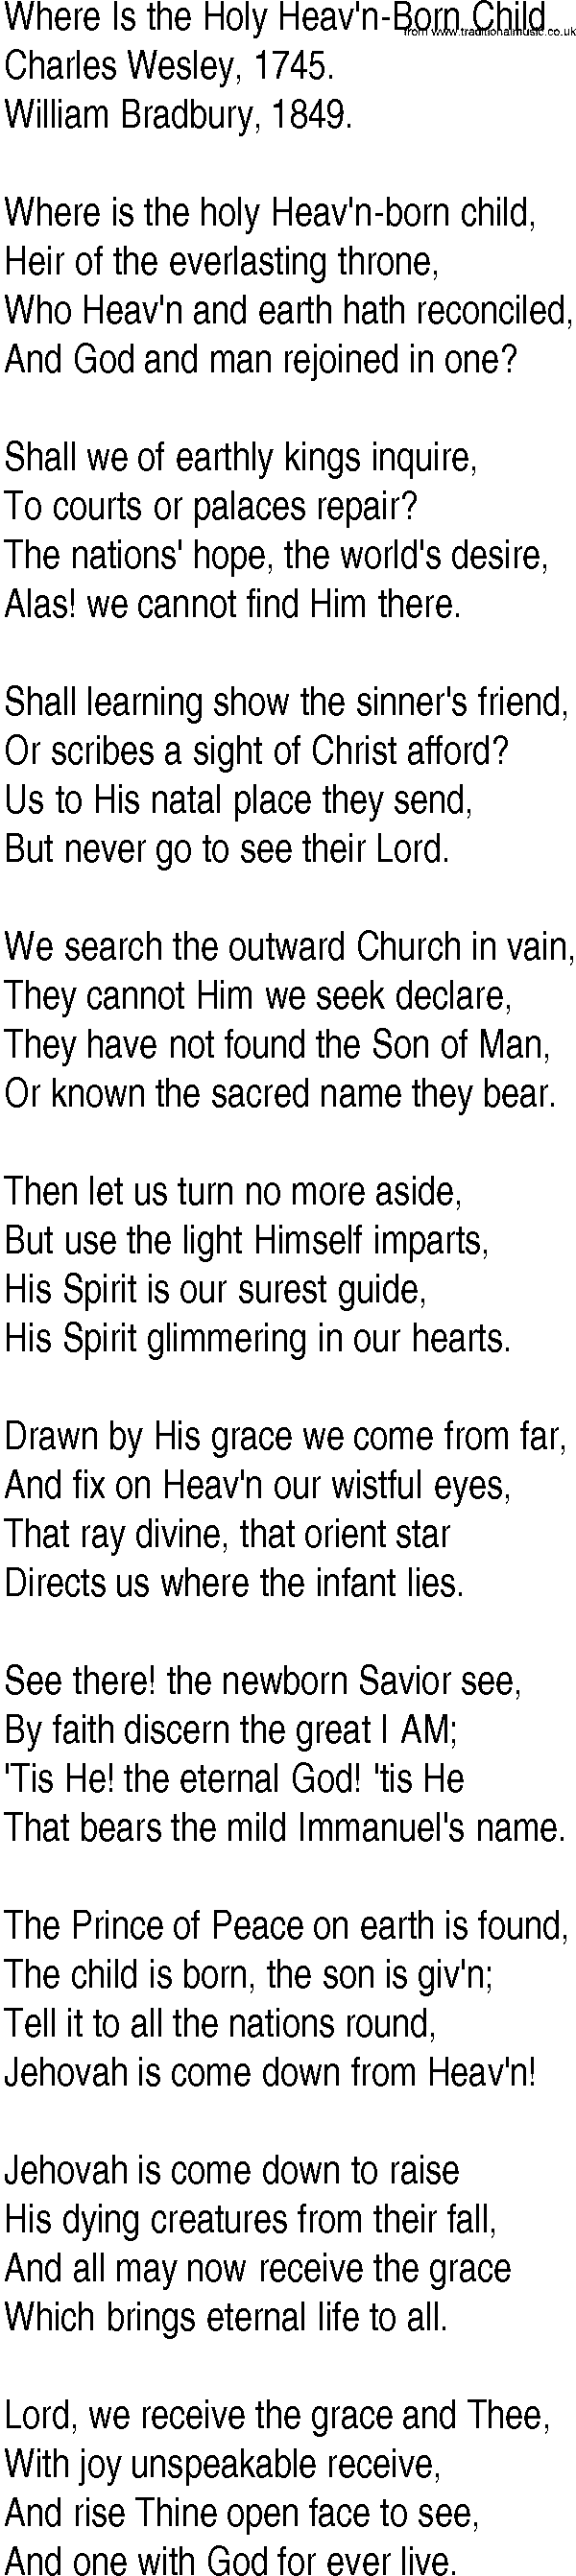 Hymn and Gospel Song: Where Is the Holy Heav'n-Born Child by Charles Wesley lyrics